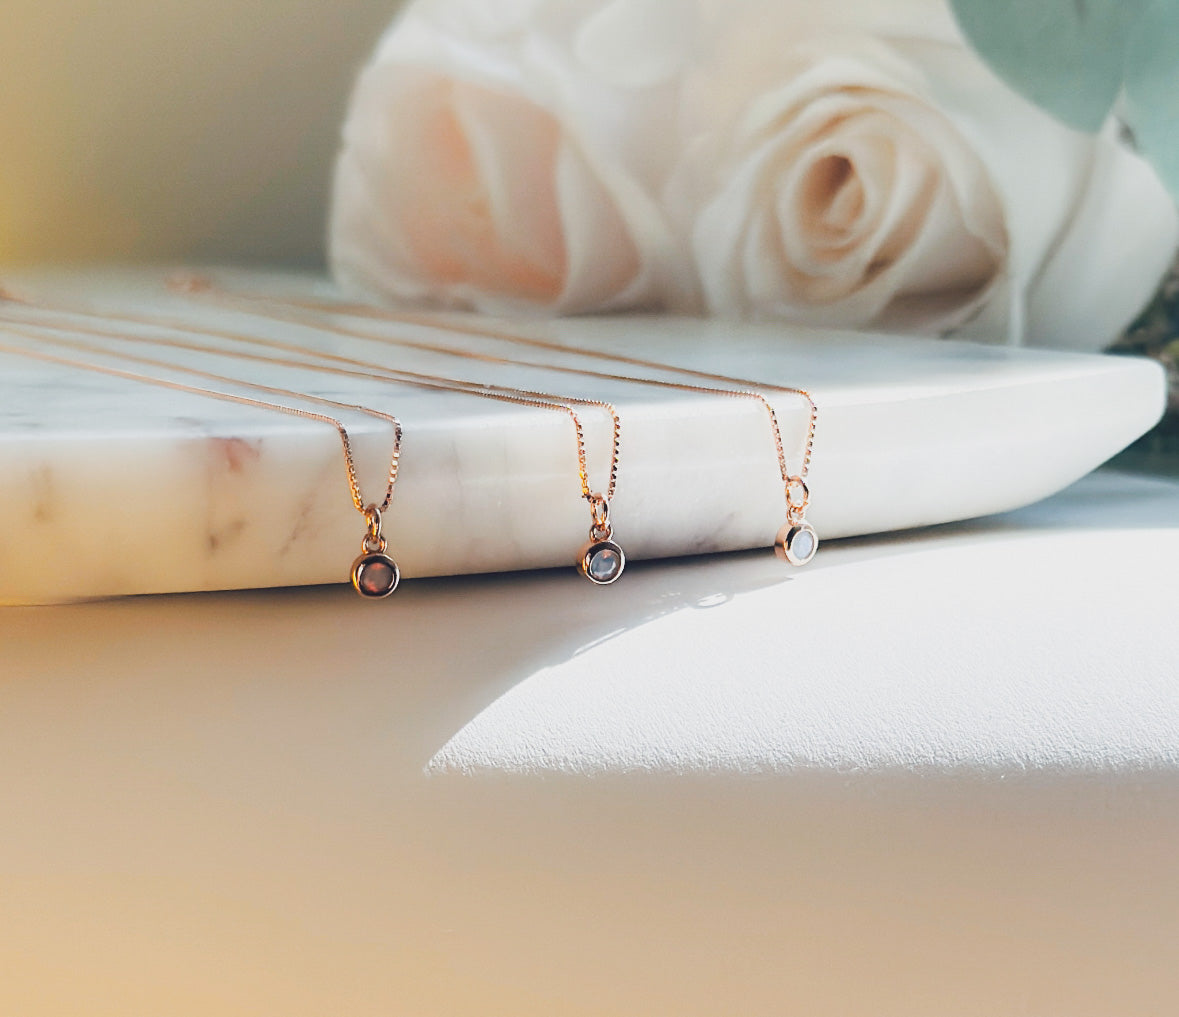 dainty sterling silver rose gold plated necklace, adorned with sterling silver rose gold-plated Opalite gemstone charm. Crafted to perfection, this necklace embodies elegance. The delicate sterling silver rose gold plated chain complements the intricate Opalite gemstone charm. 